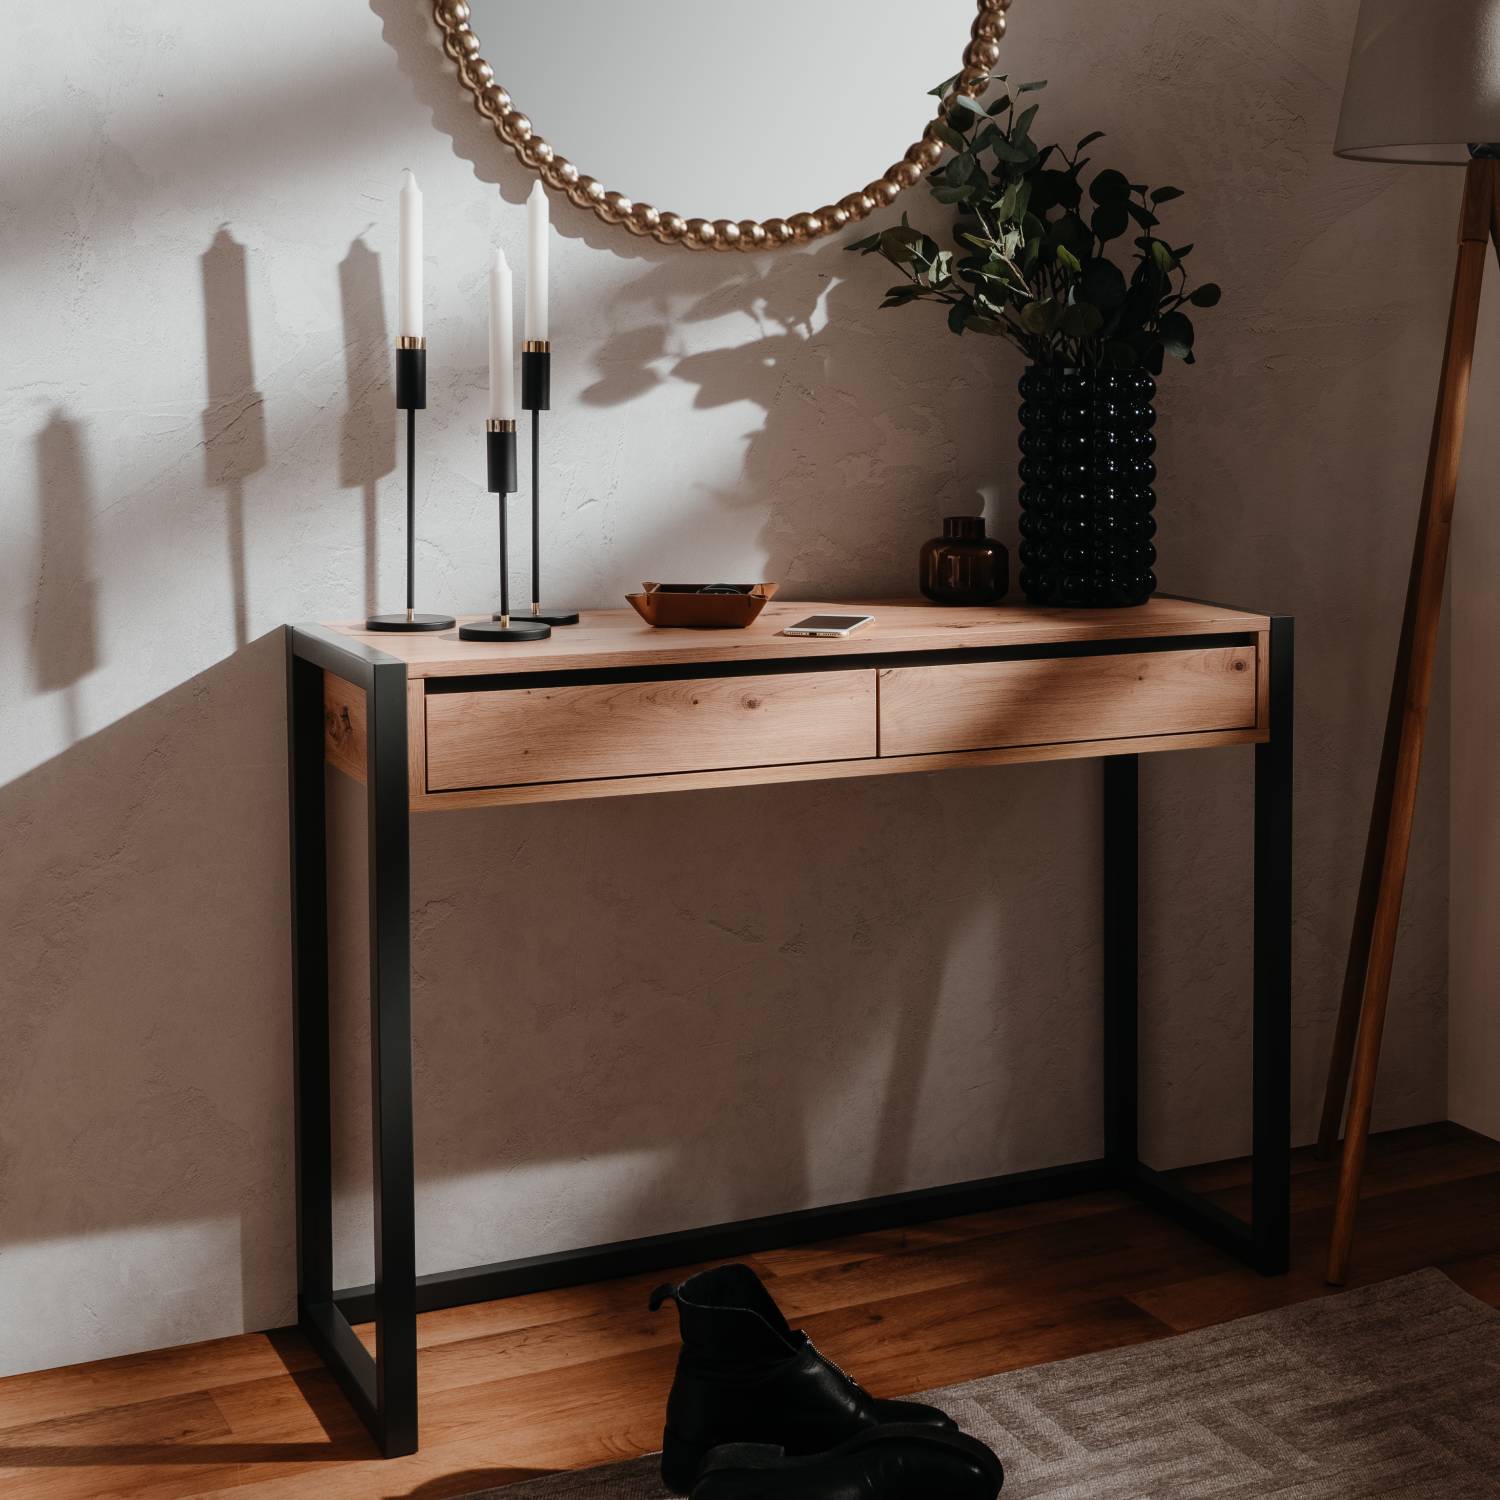 Console Table with 2 Drawers Hallway Furniture Desk Wood Industrial Style Storage